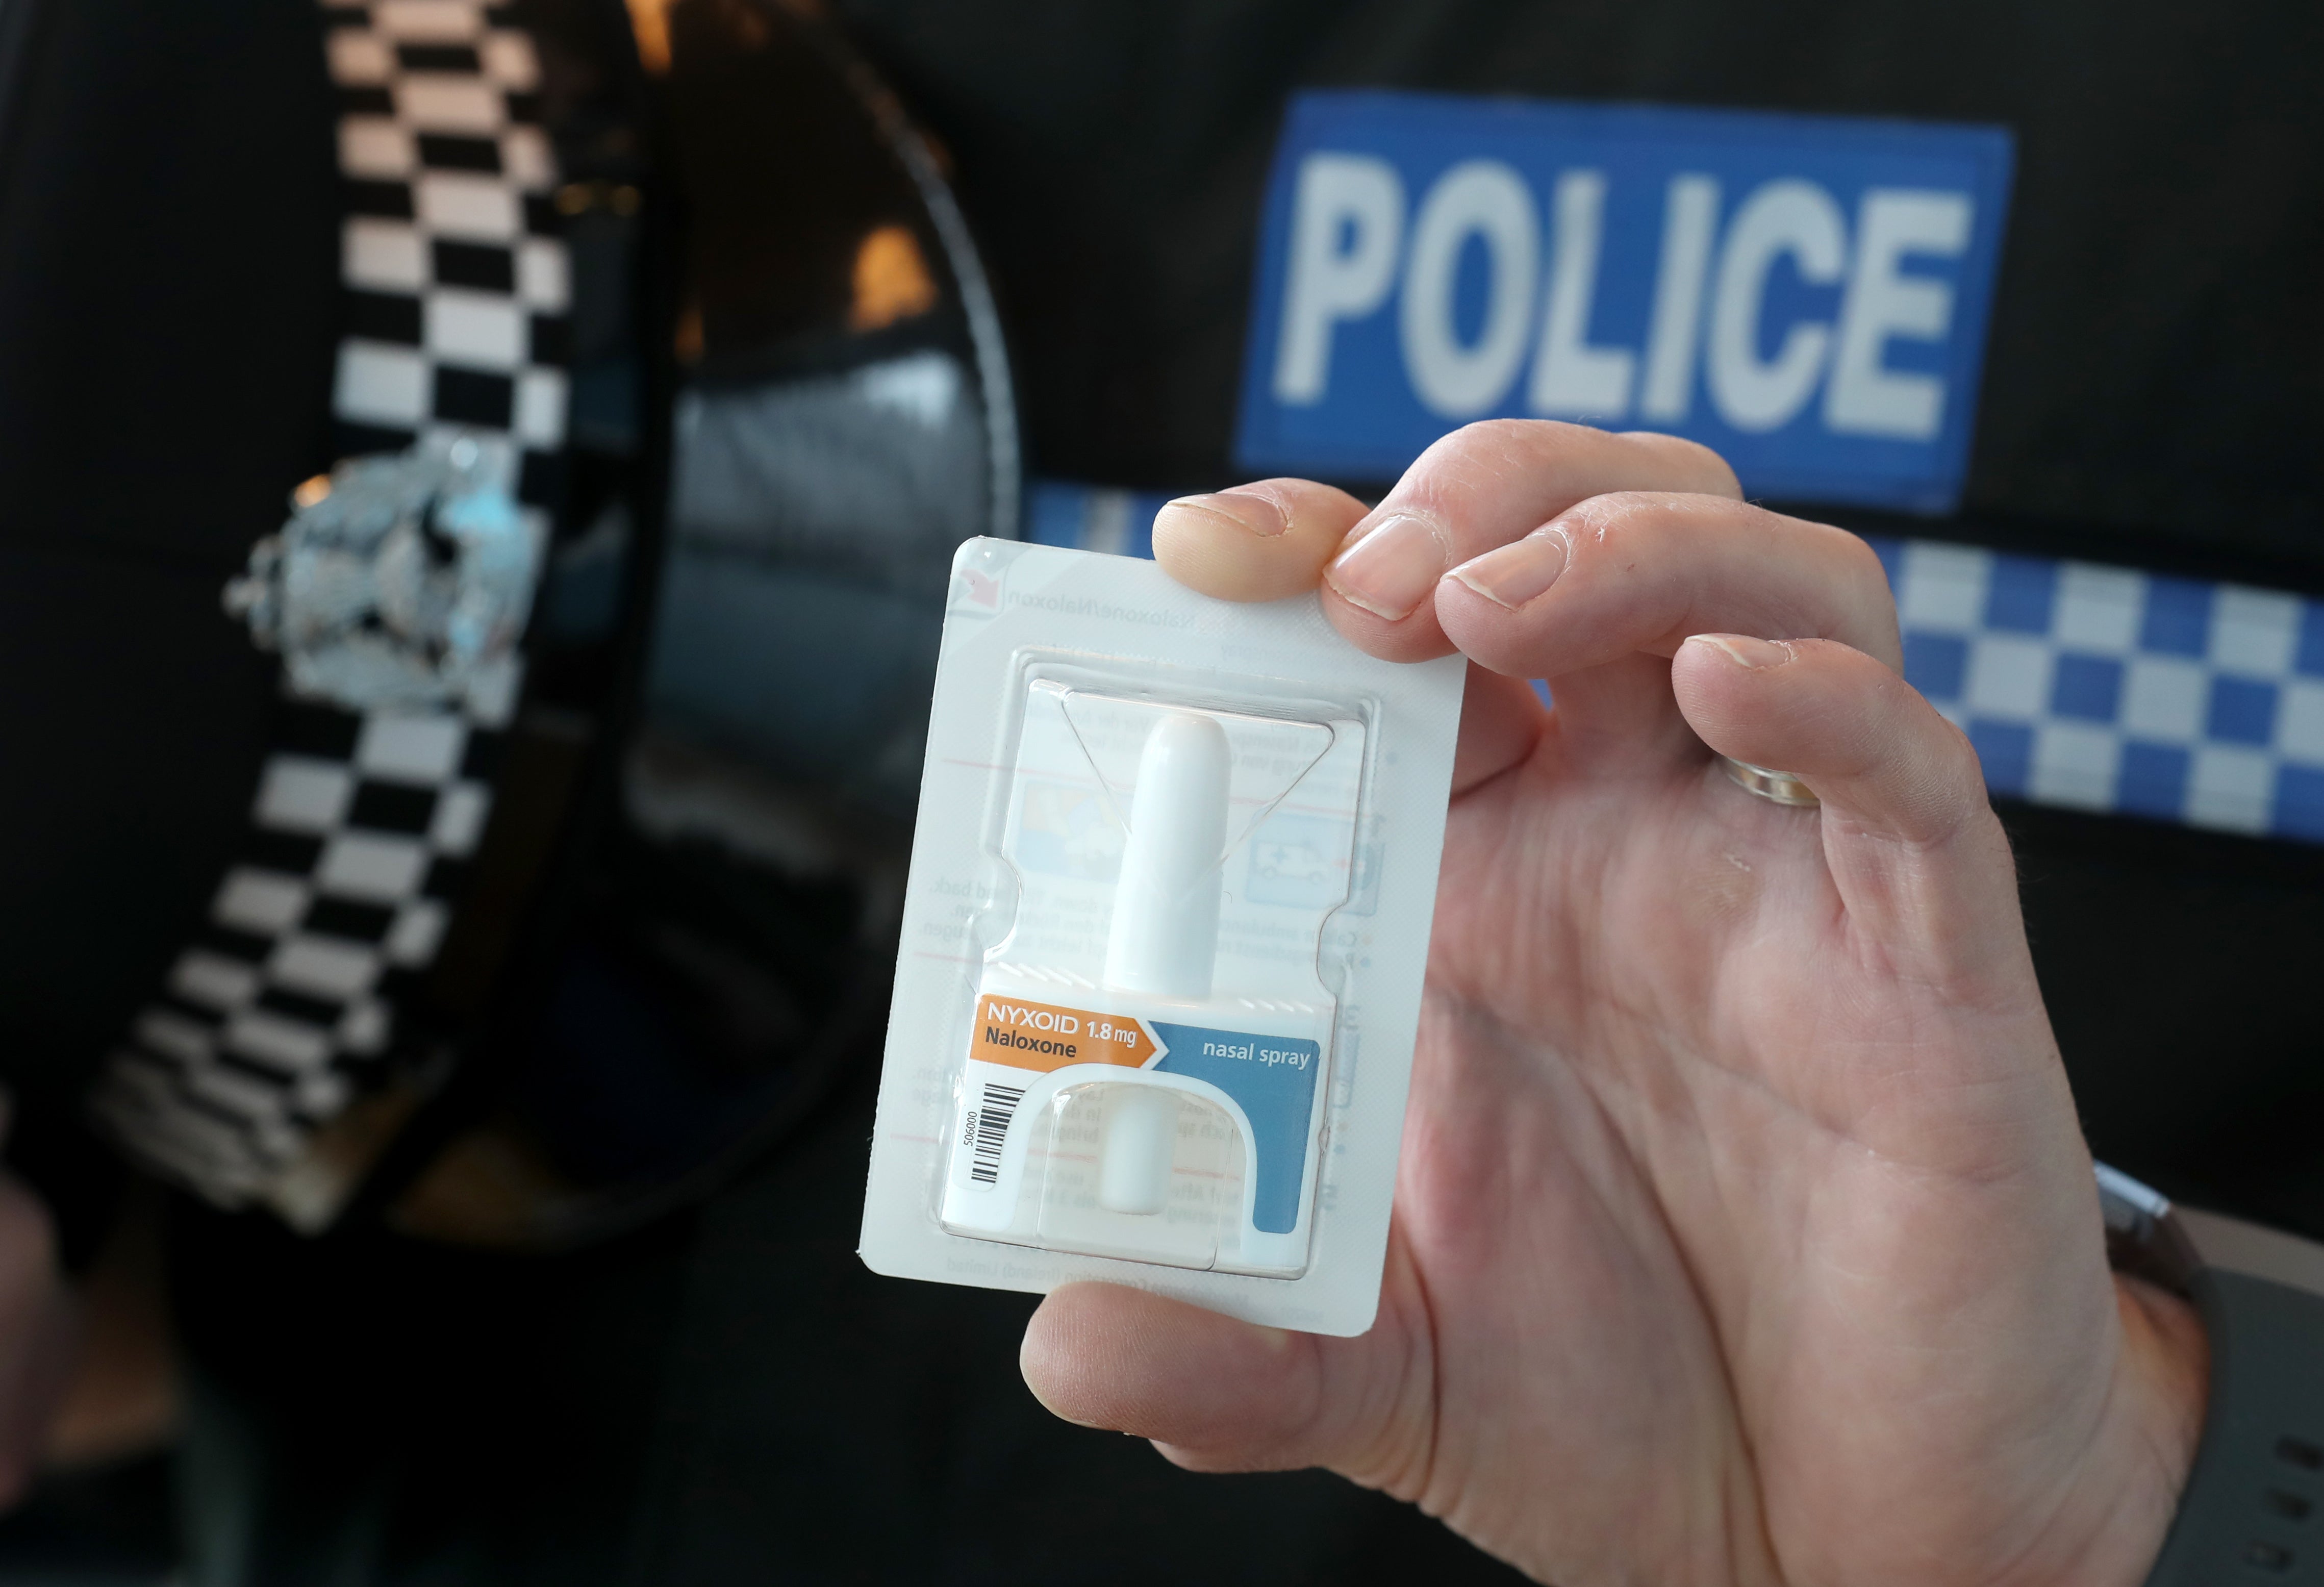 All Police Scotland officers carry Naloxone – a life-saving treatment to reverse opioid overdose (Andrew Milligan/PA)